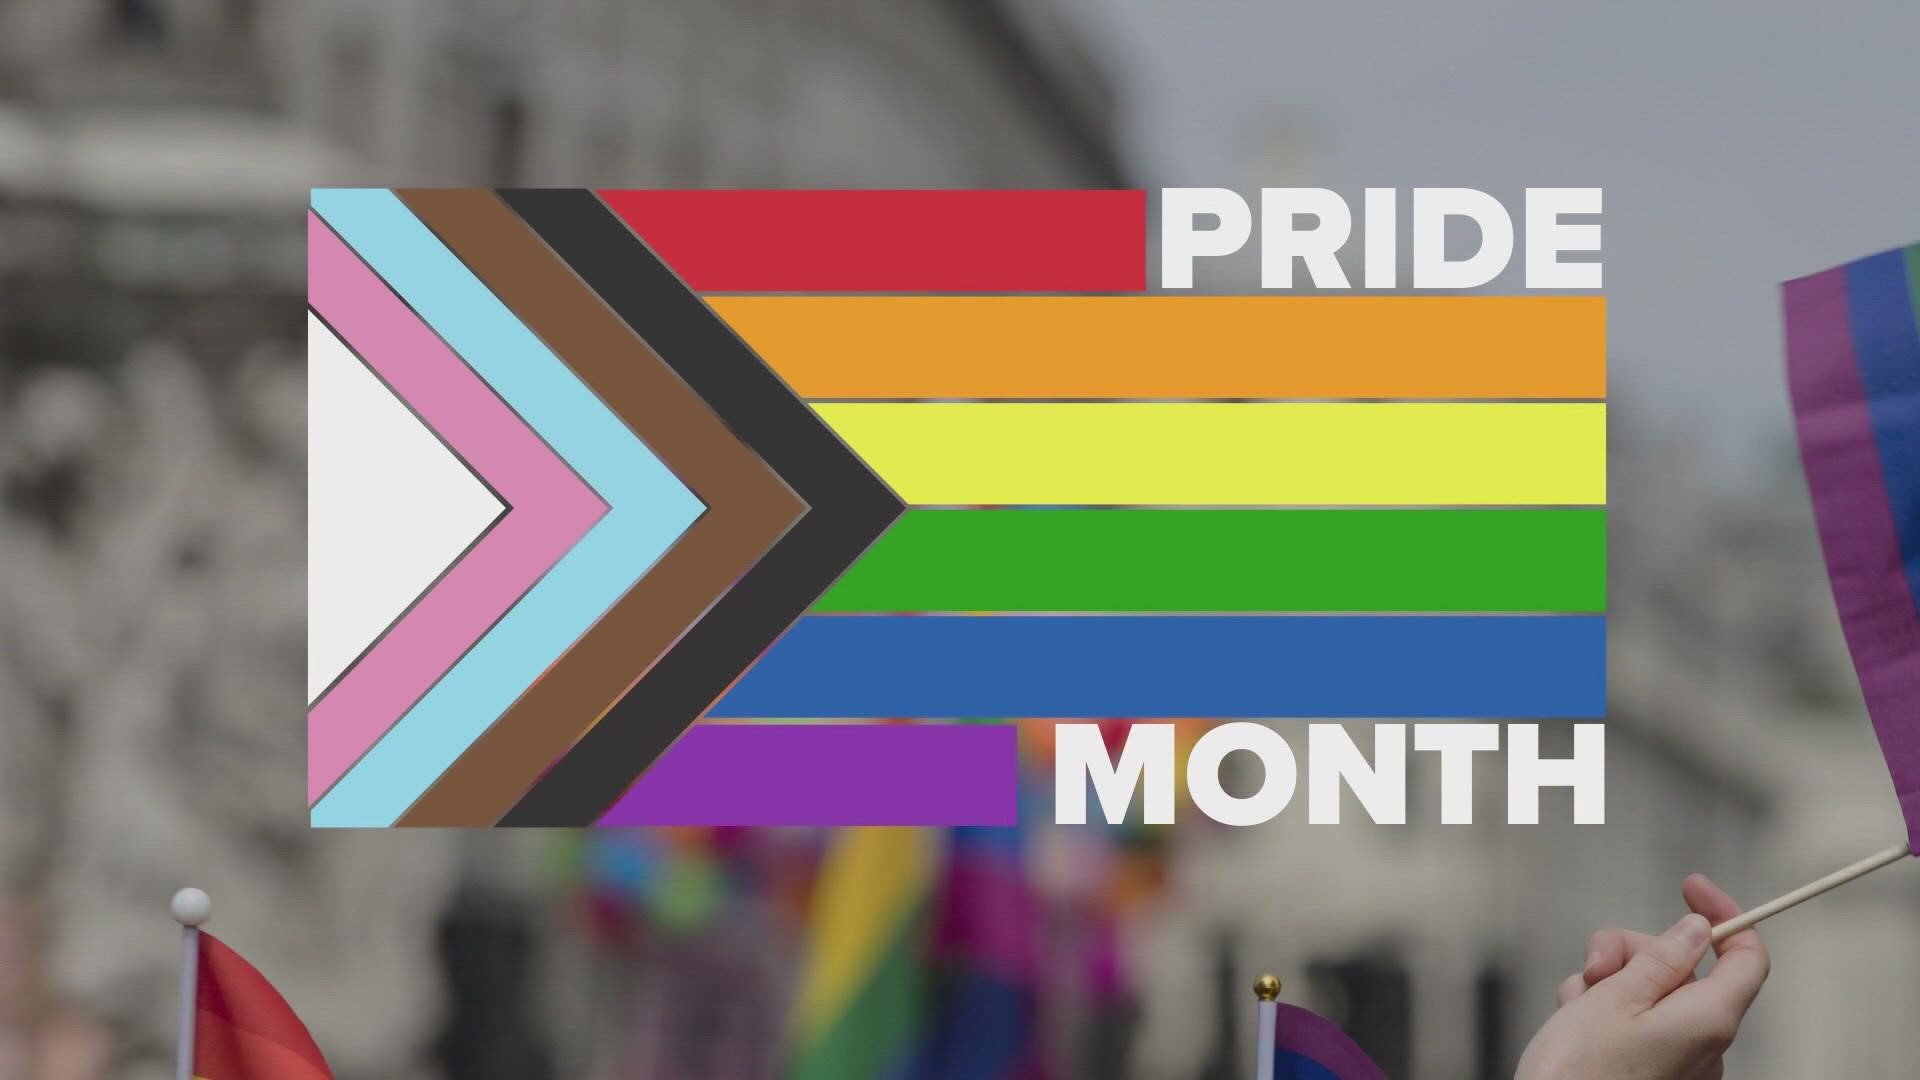 Wednesday marks the start of Pride Month. It's celebrated each June as a tribute to those involved in the Stonewall Riots.